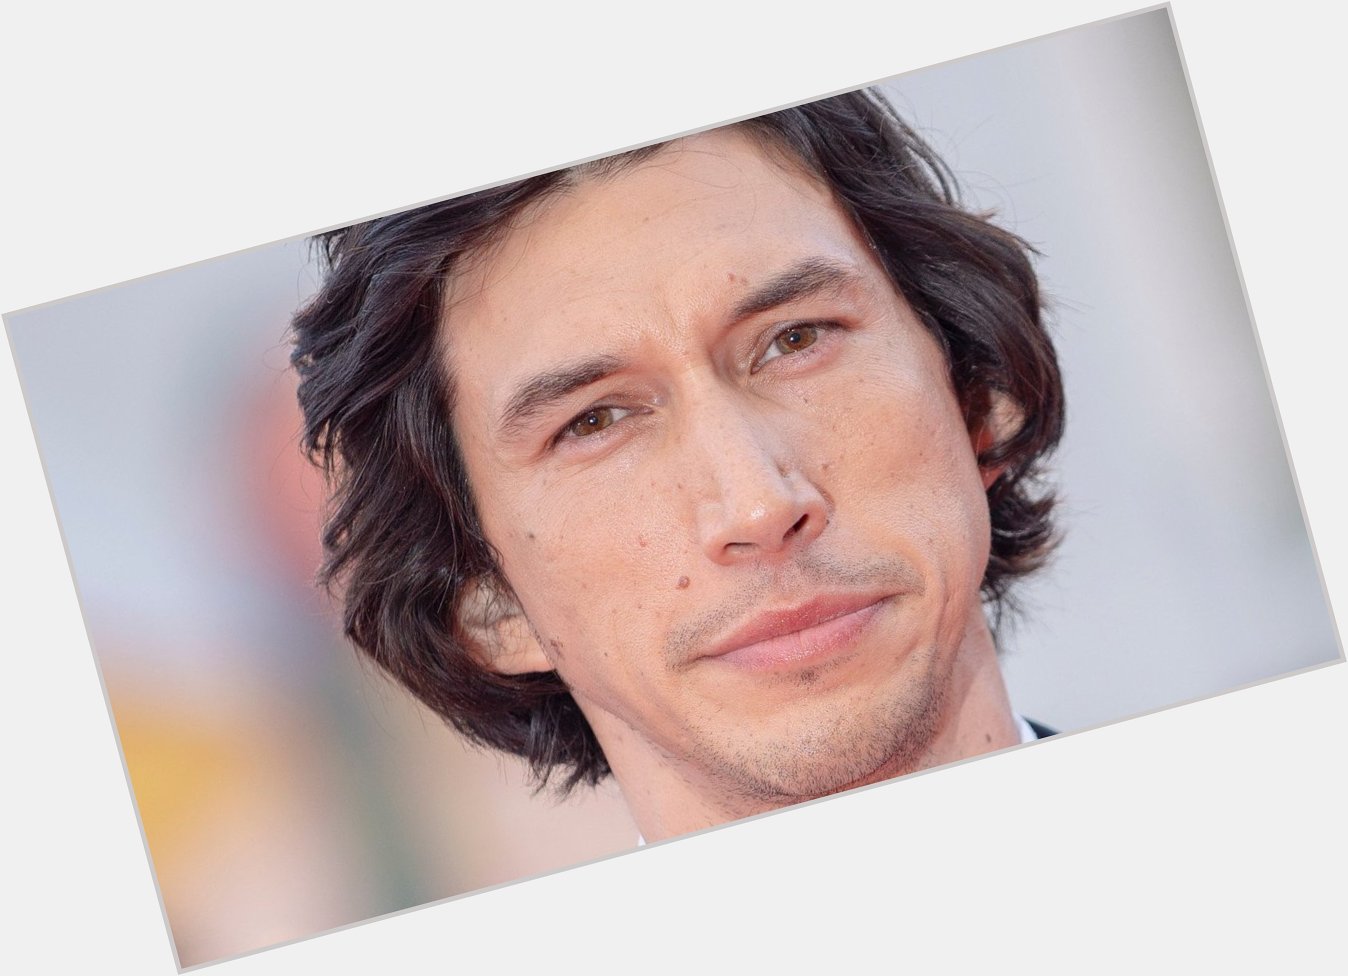 Happy Birthday to the Original Man, the elusive Sasquatch, the fuckable Redwood, the only man ever, Mr. Adam Driver. 